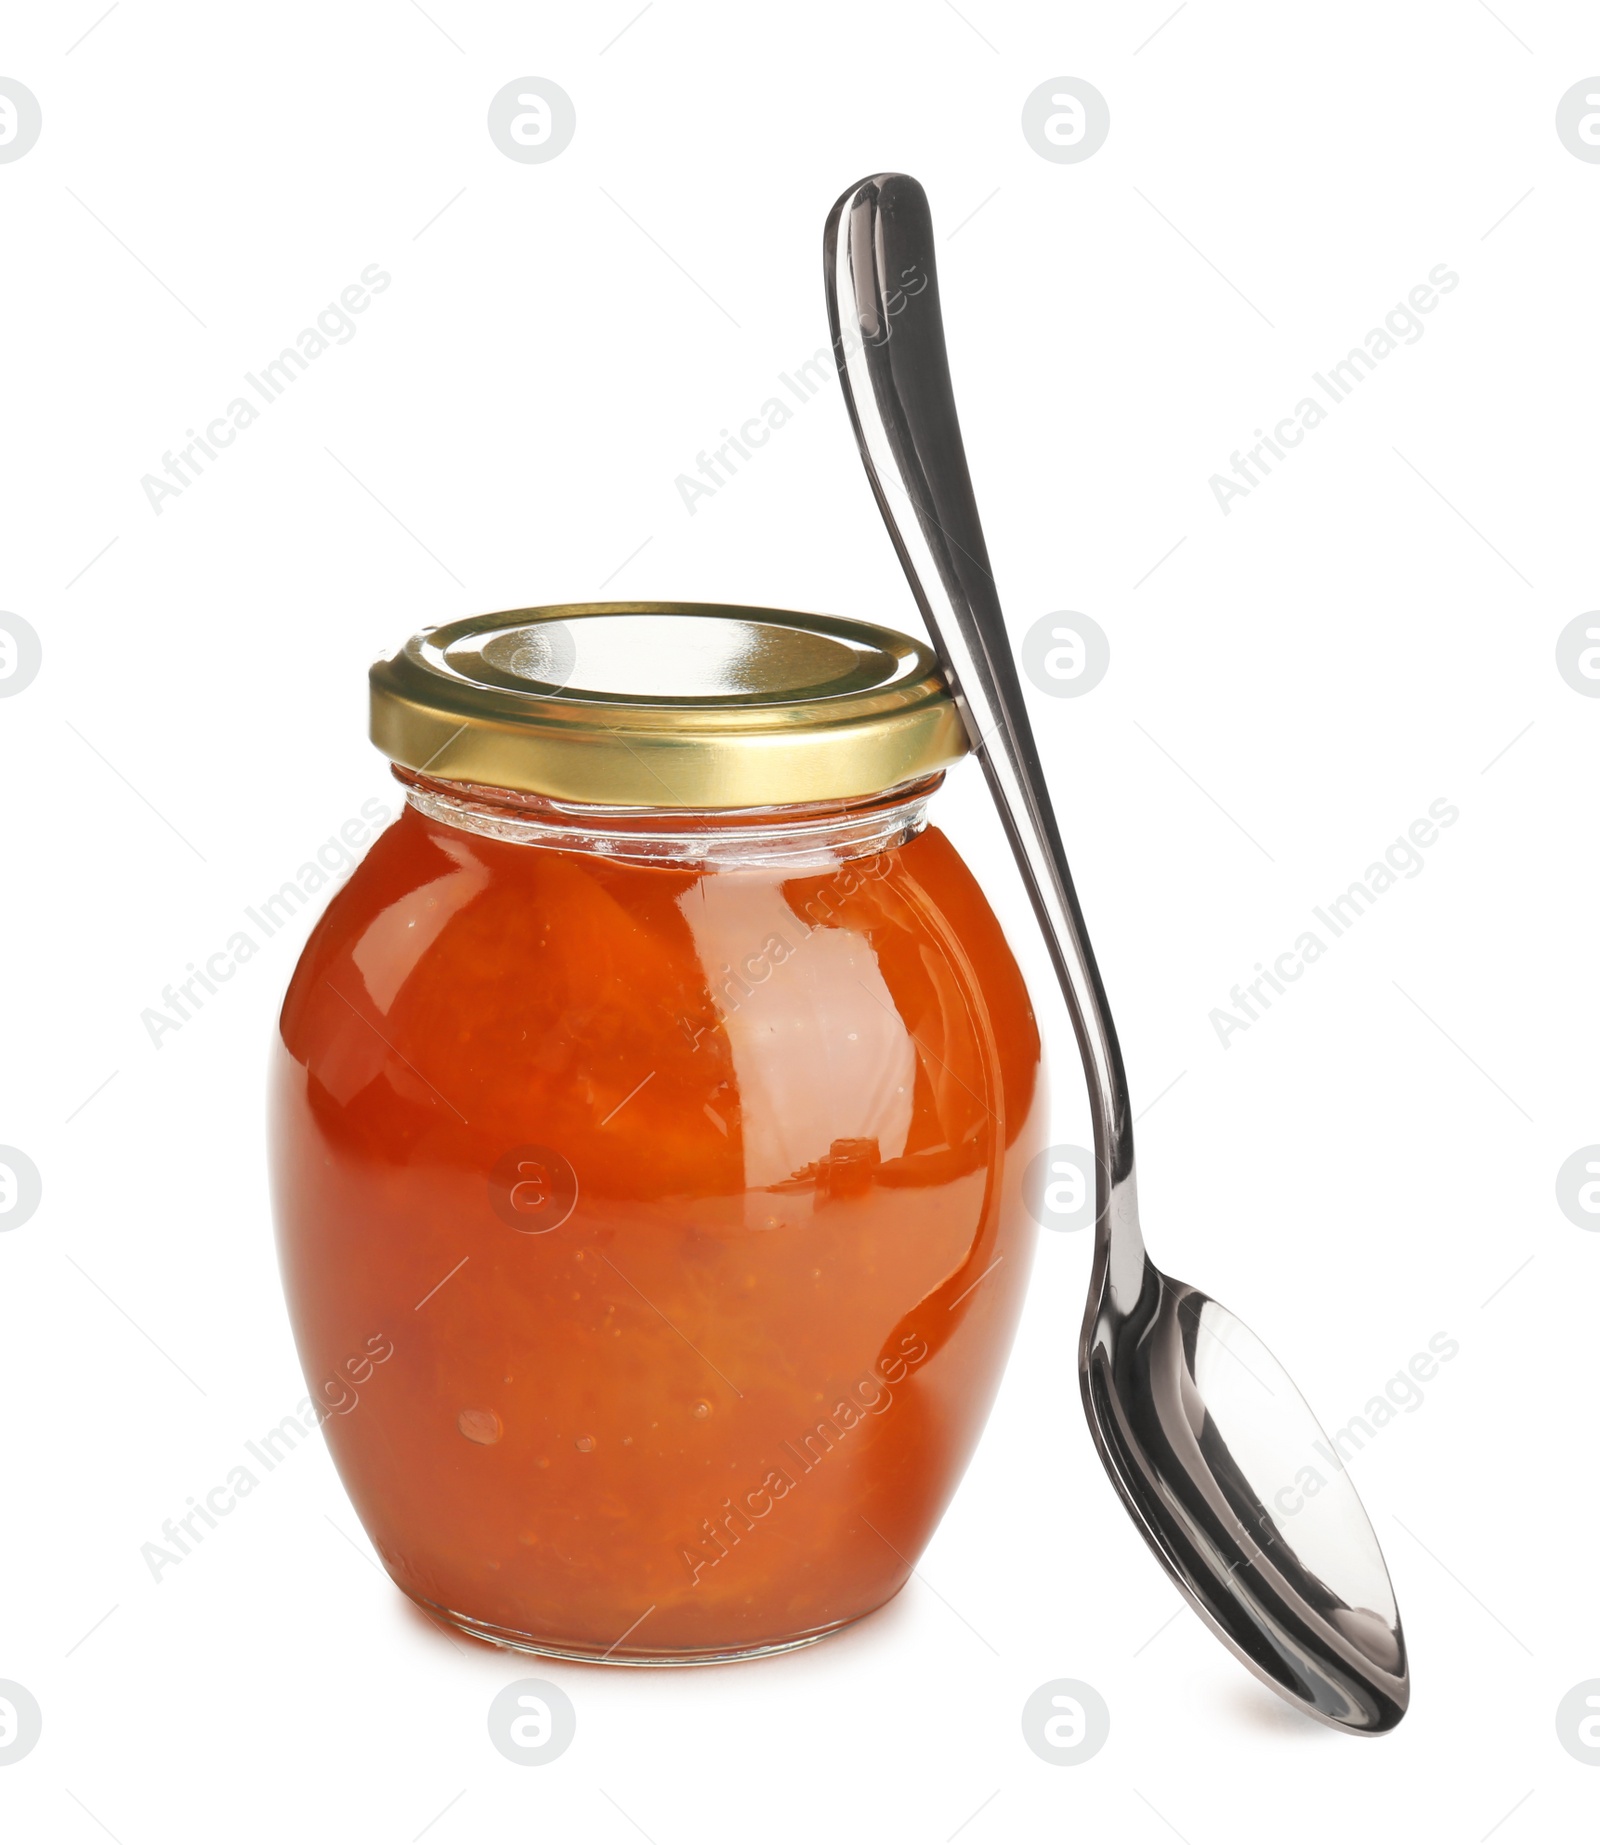 Photo of Jar with sweet jam and spoon on white background